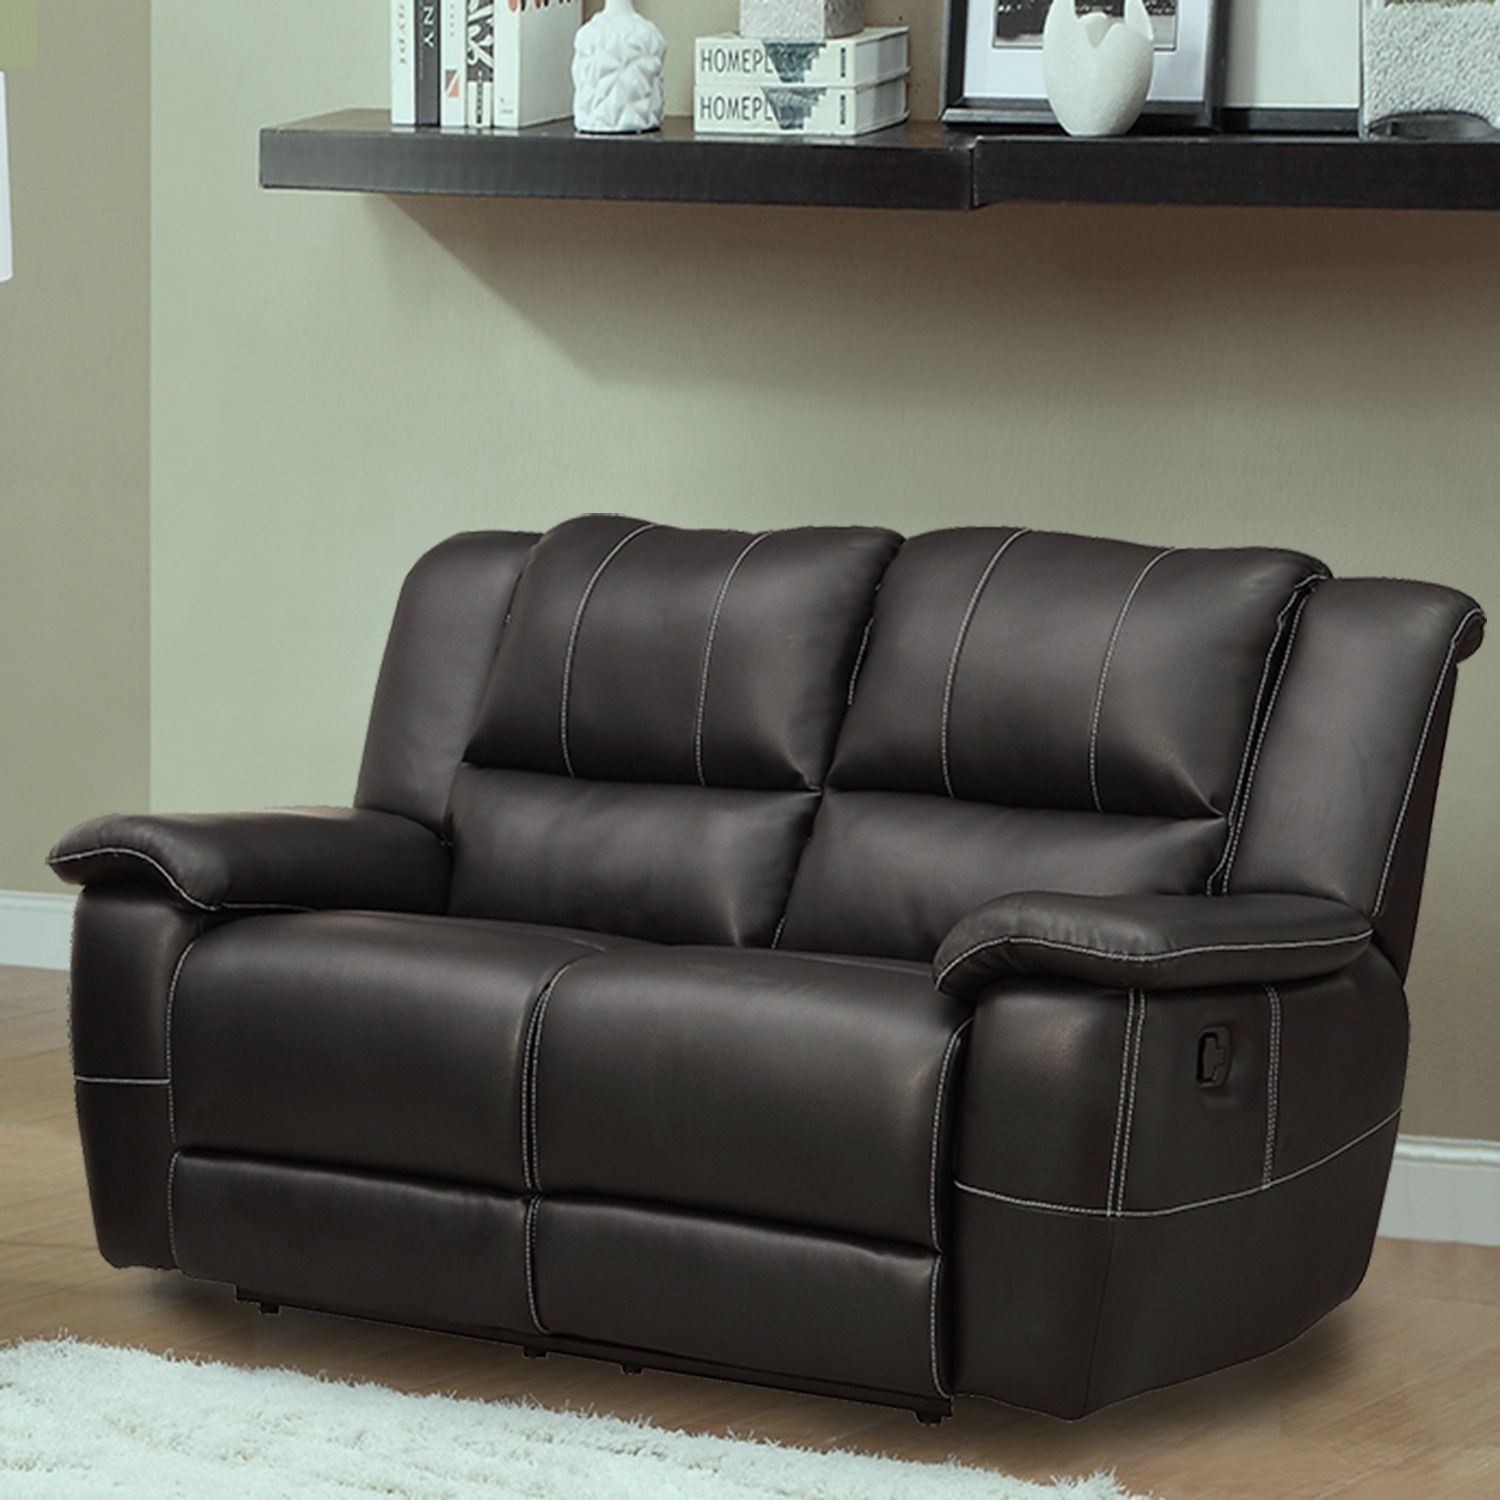 Griffin black bonded leather oversized double recliner loveseat